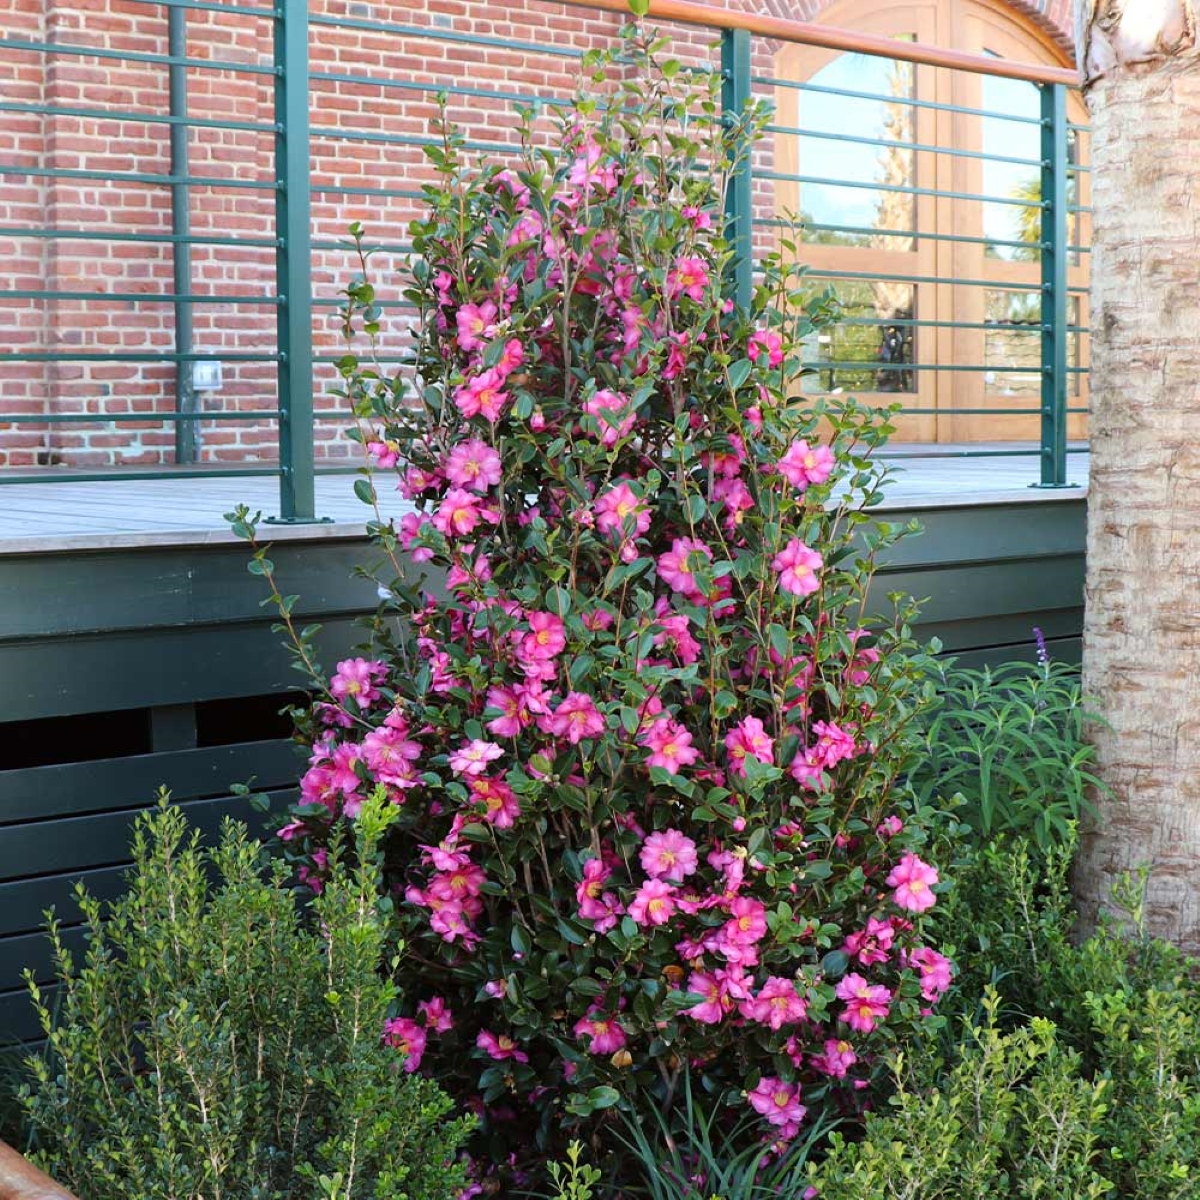 Camellia bush with pink flowers